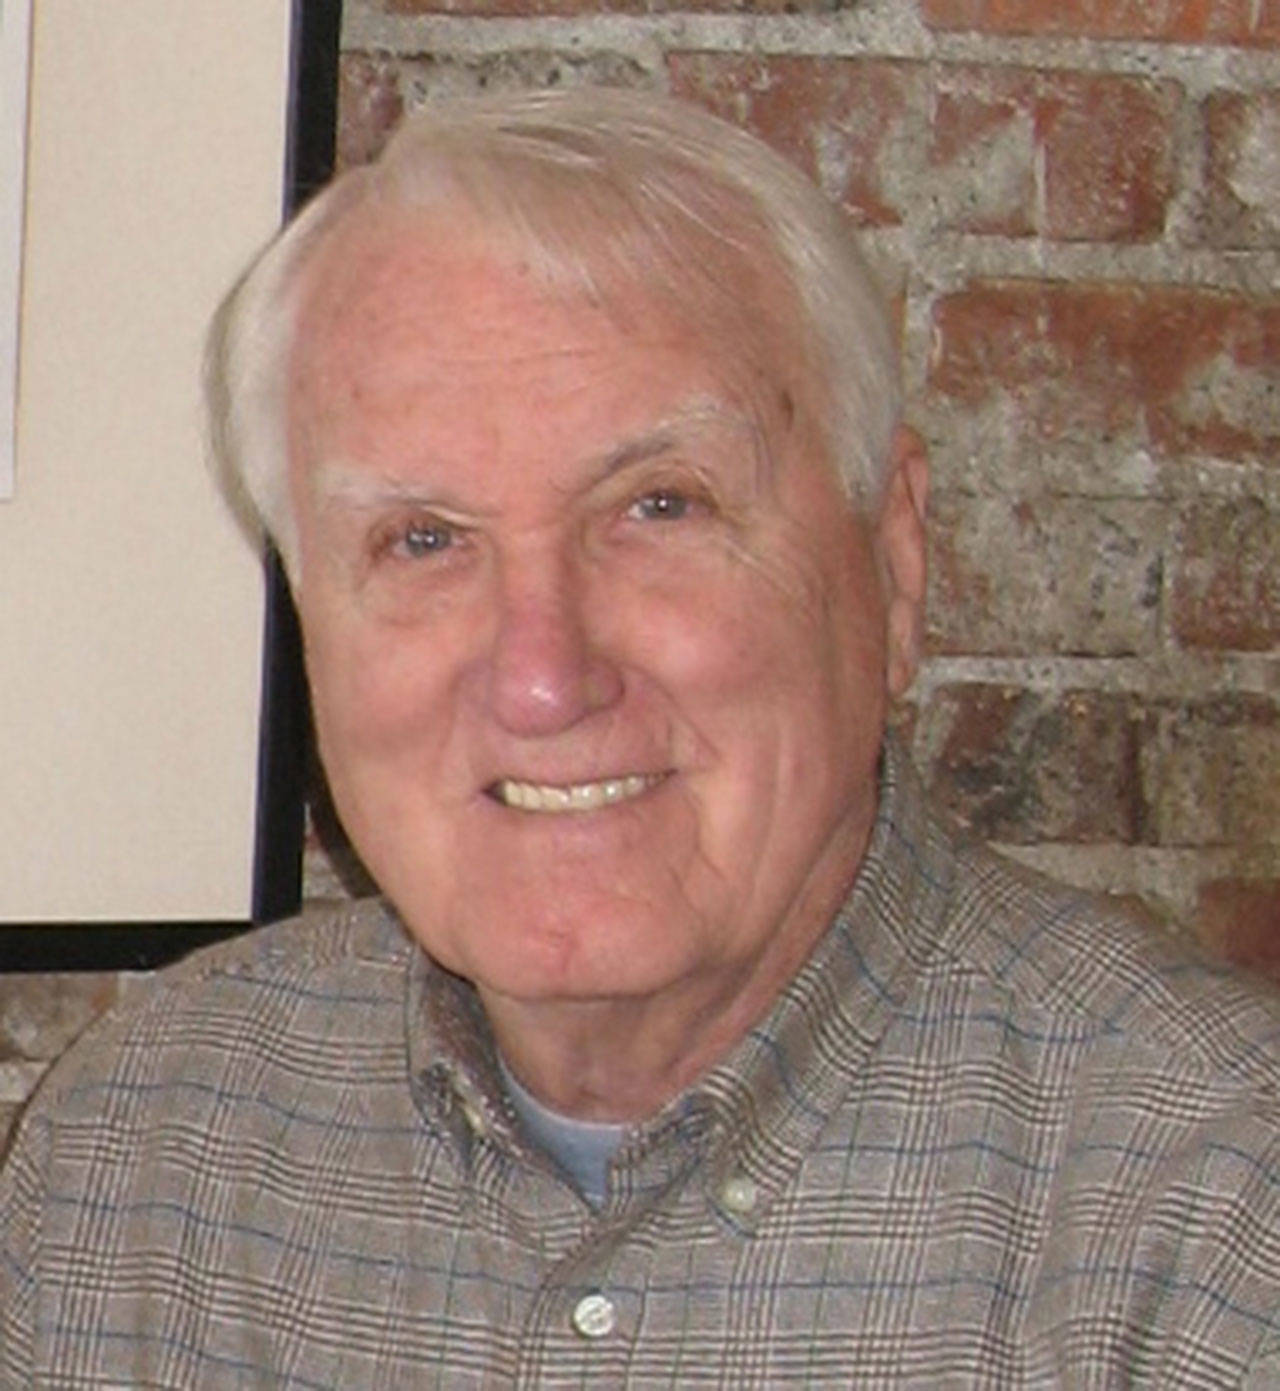 Lloyd Olson, a former superintendent for Chimacum School District, died Sunday at his home in Cle Elum at the age of 84. (Olson family)